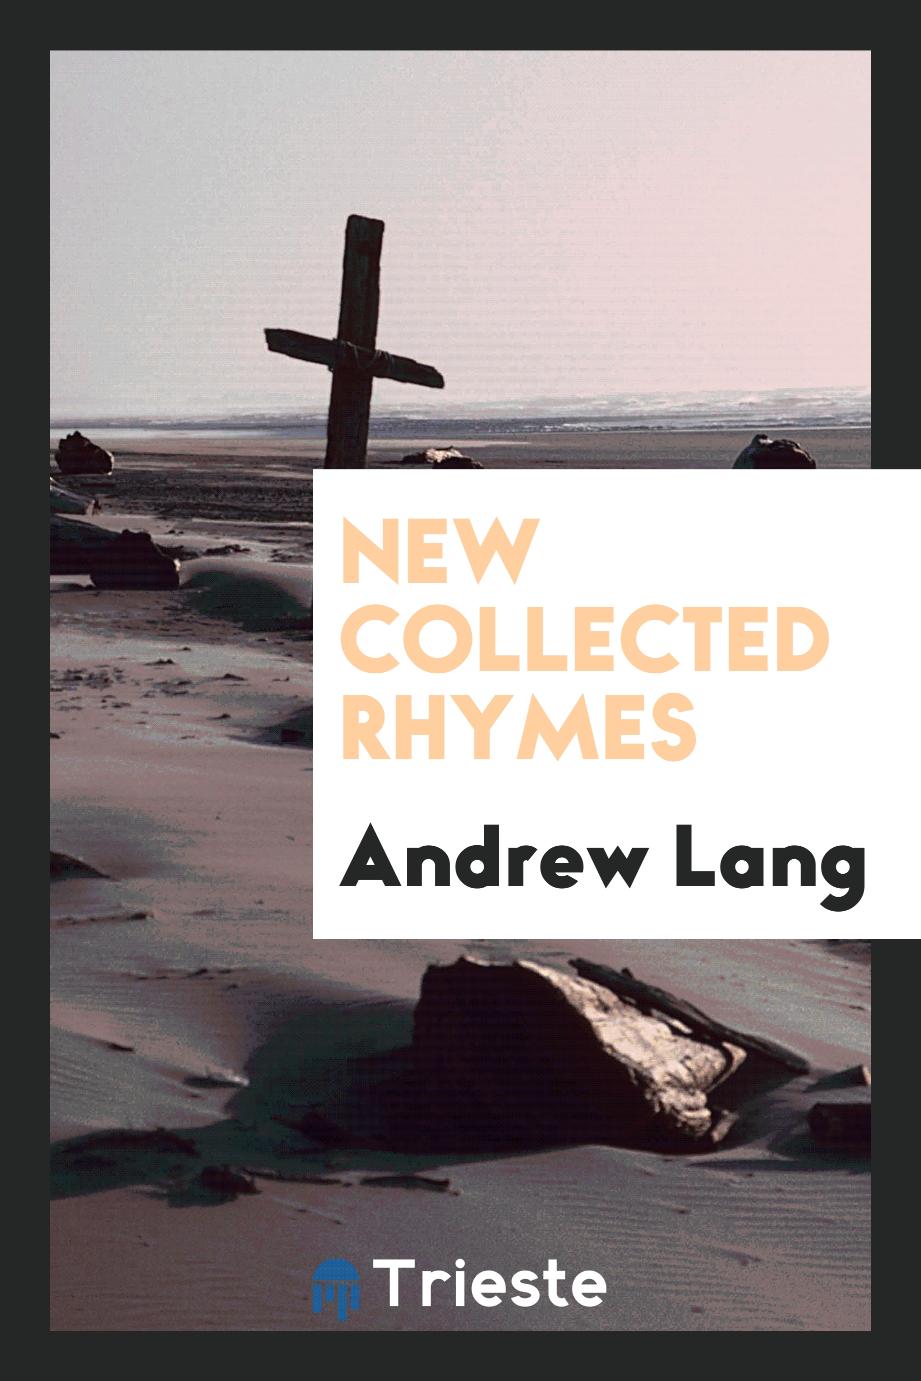 New Collected Rhymes